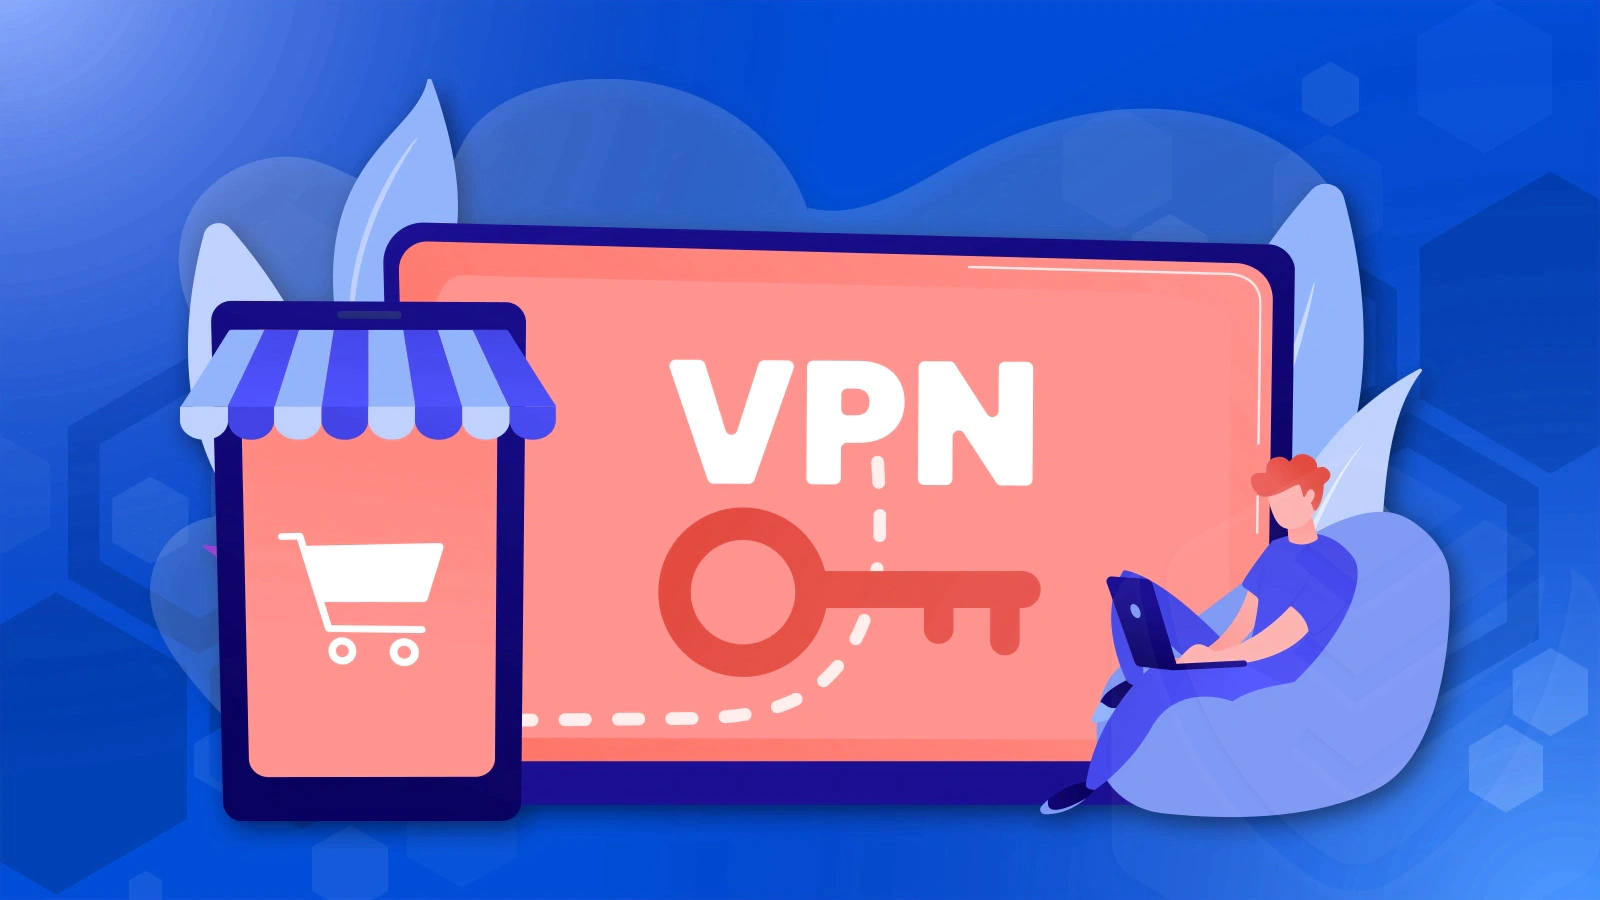 Use a VPN for shopping